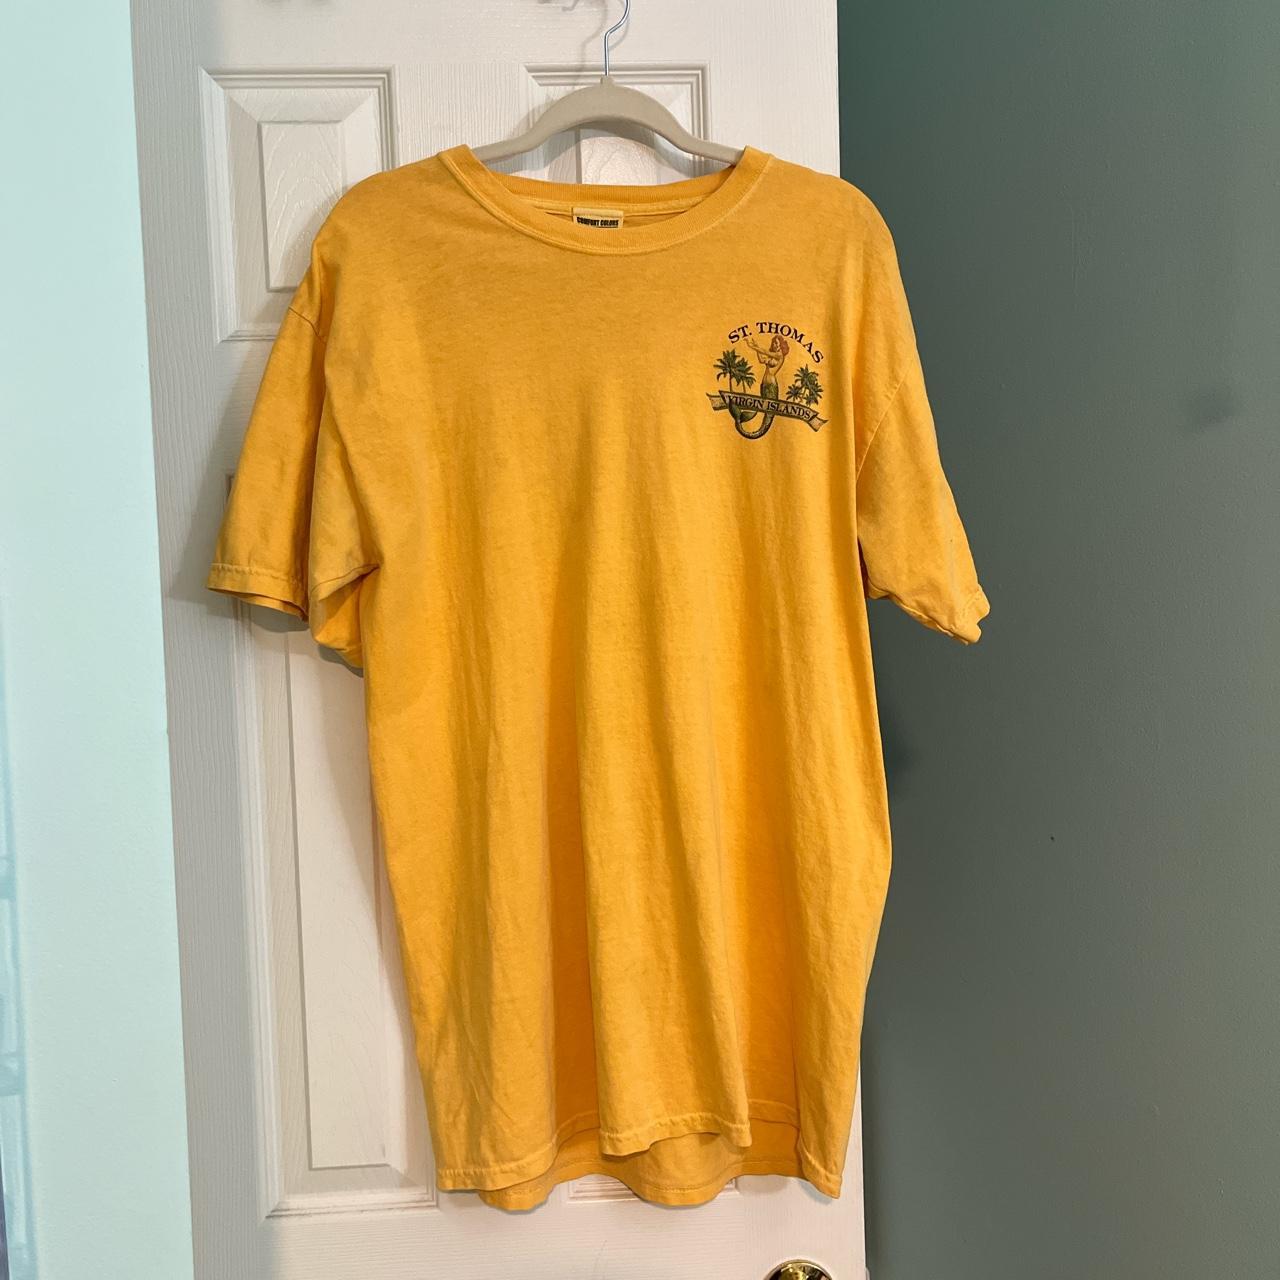 Product Image 1 - yellow comfort colors st. thomas